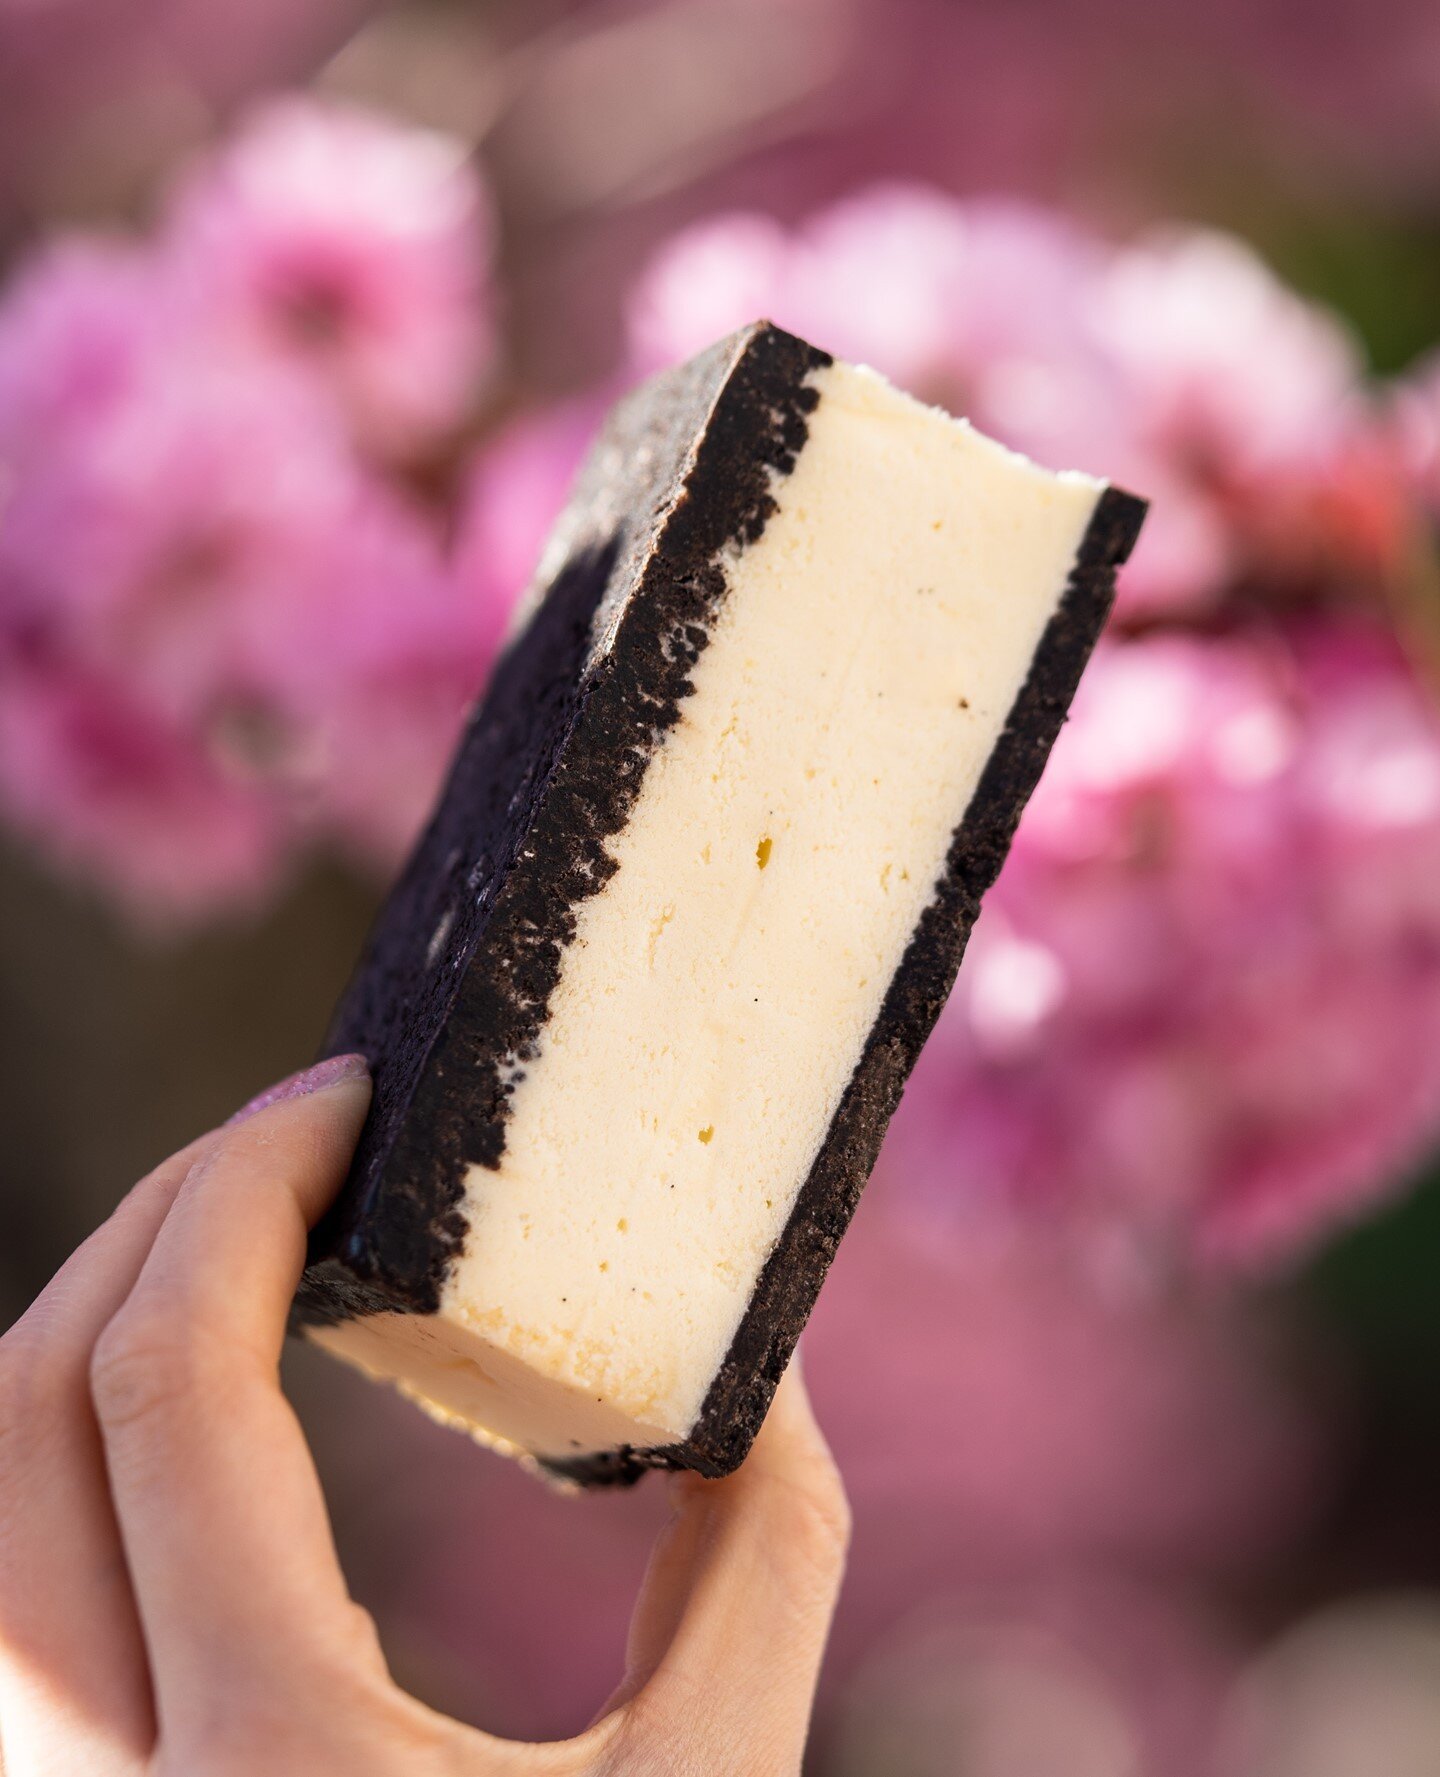 WE HAVE A NEW PLANT-BASED ICE CREAM FLAVOUR AT THE PARLOUR! INTRODUCING VEGAN VANILLA OAT MILK ICE CREAM SAMMIES!⁠
___⁠
STAY TUNED FOR MORE PLANT-BASED OPTIONS TO COME!⁠
⁠
#vancouver #foodbeast #vancouverfoodie #yvreats #dishedvan #f52grams #buzzfeed